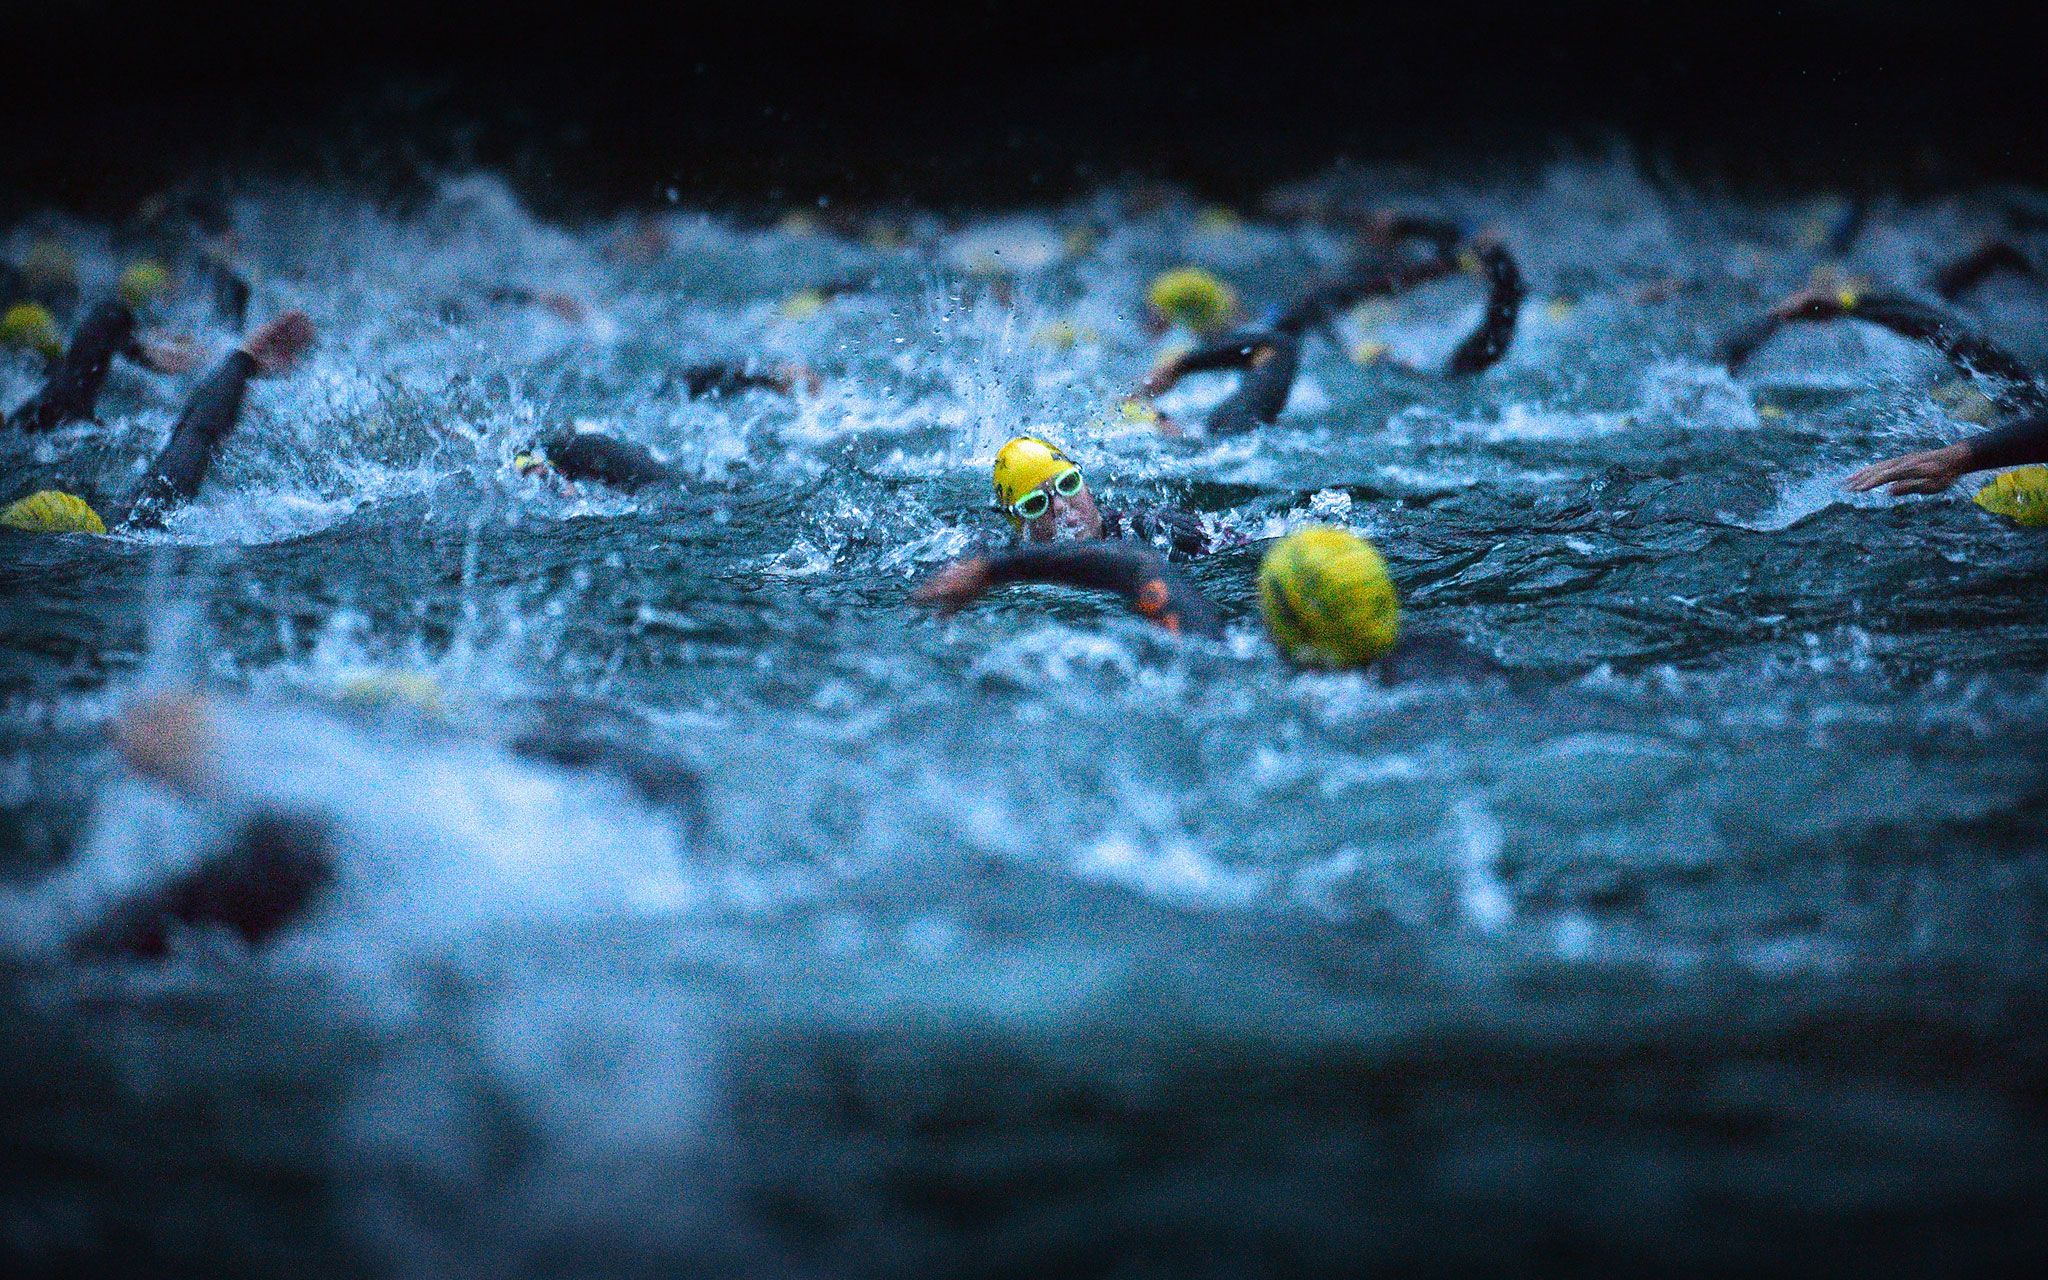 Norseman Xtreme Triathlon - The Week in Pictures for July 29